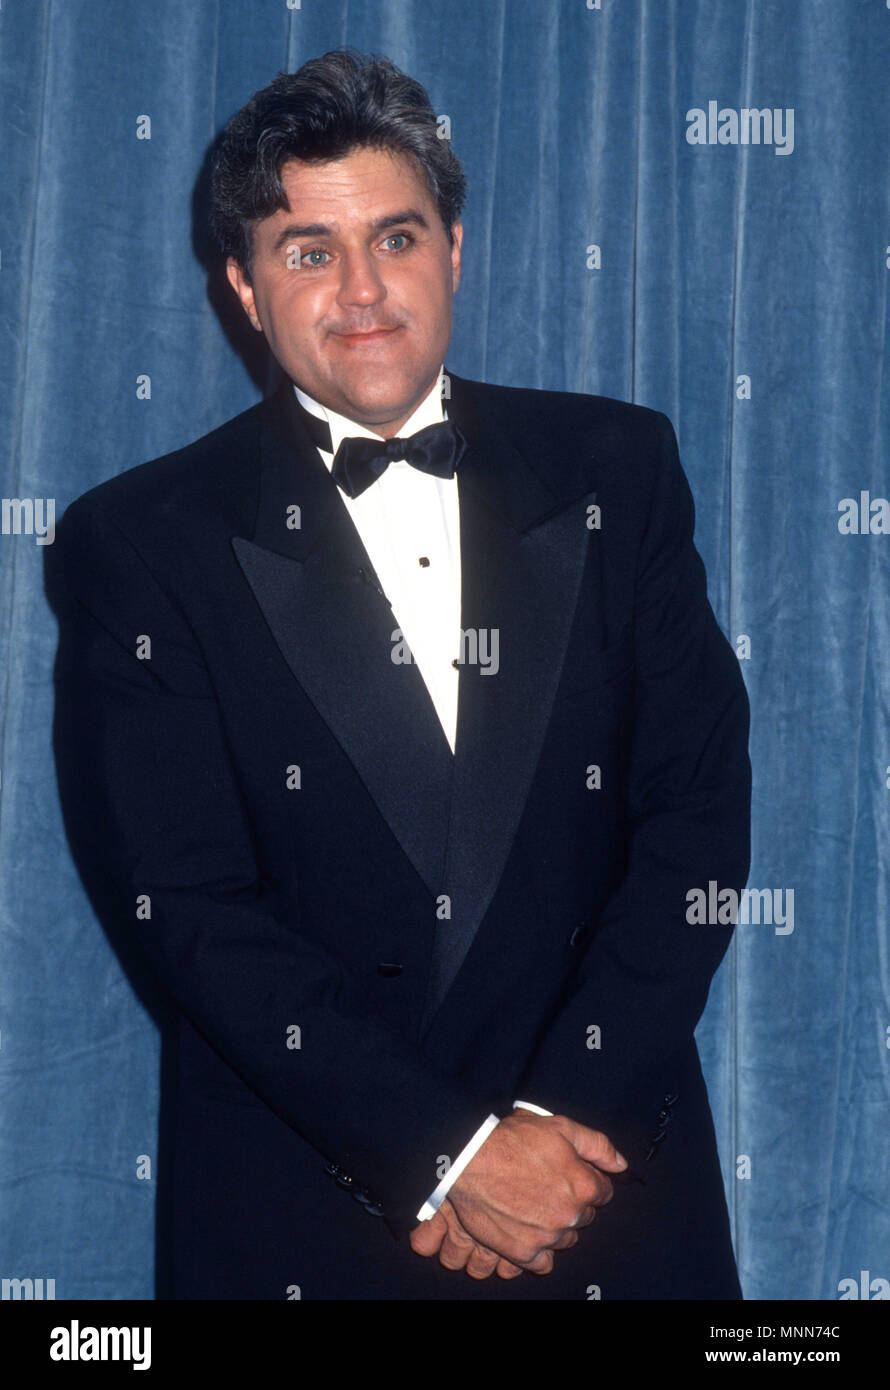 PASADENA, CA - SEPTEMBER 16: Comedian Jay Leno attends the 42nd Annual Primetime Emmy Awards on September 16,1990 at the Pasadena Civic Auditorium in Pasadena, California. Photo by Barry King/Alamy Stock Photo Stock Photo